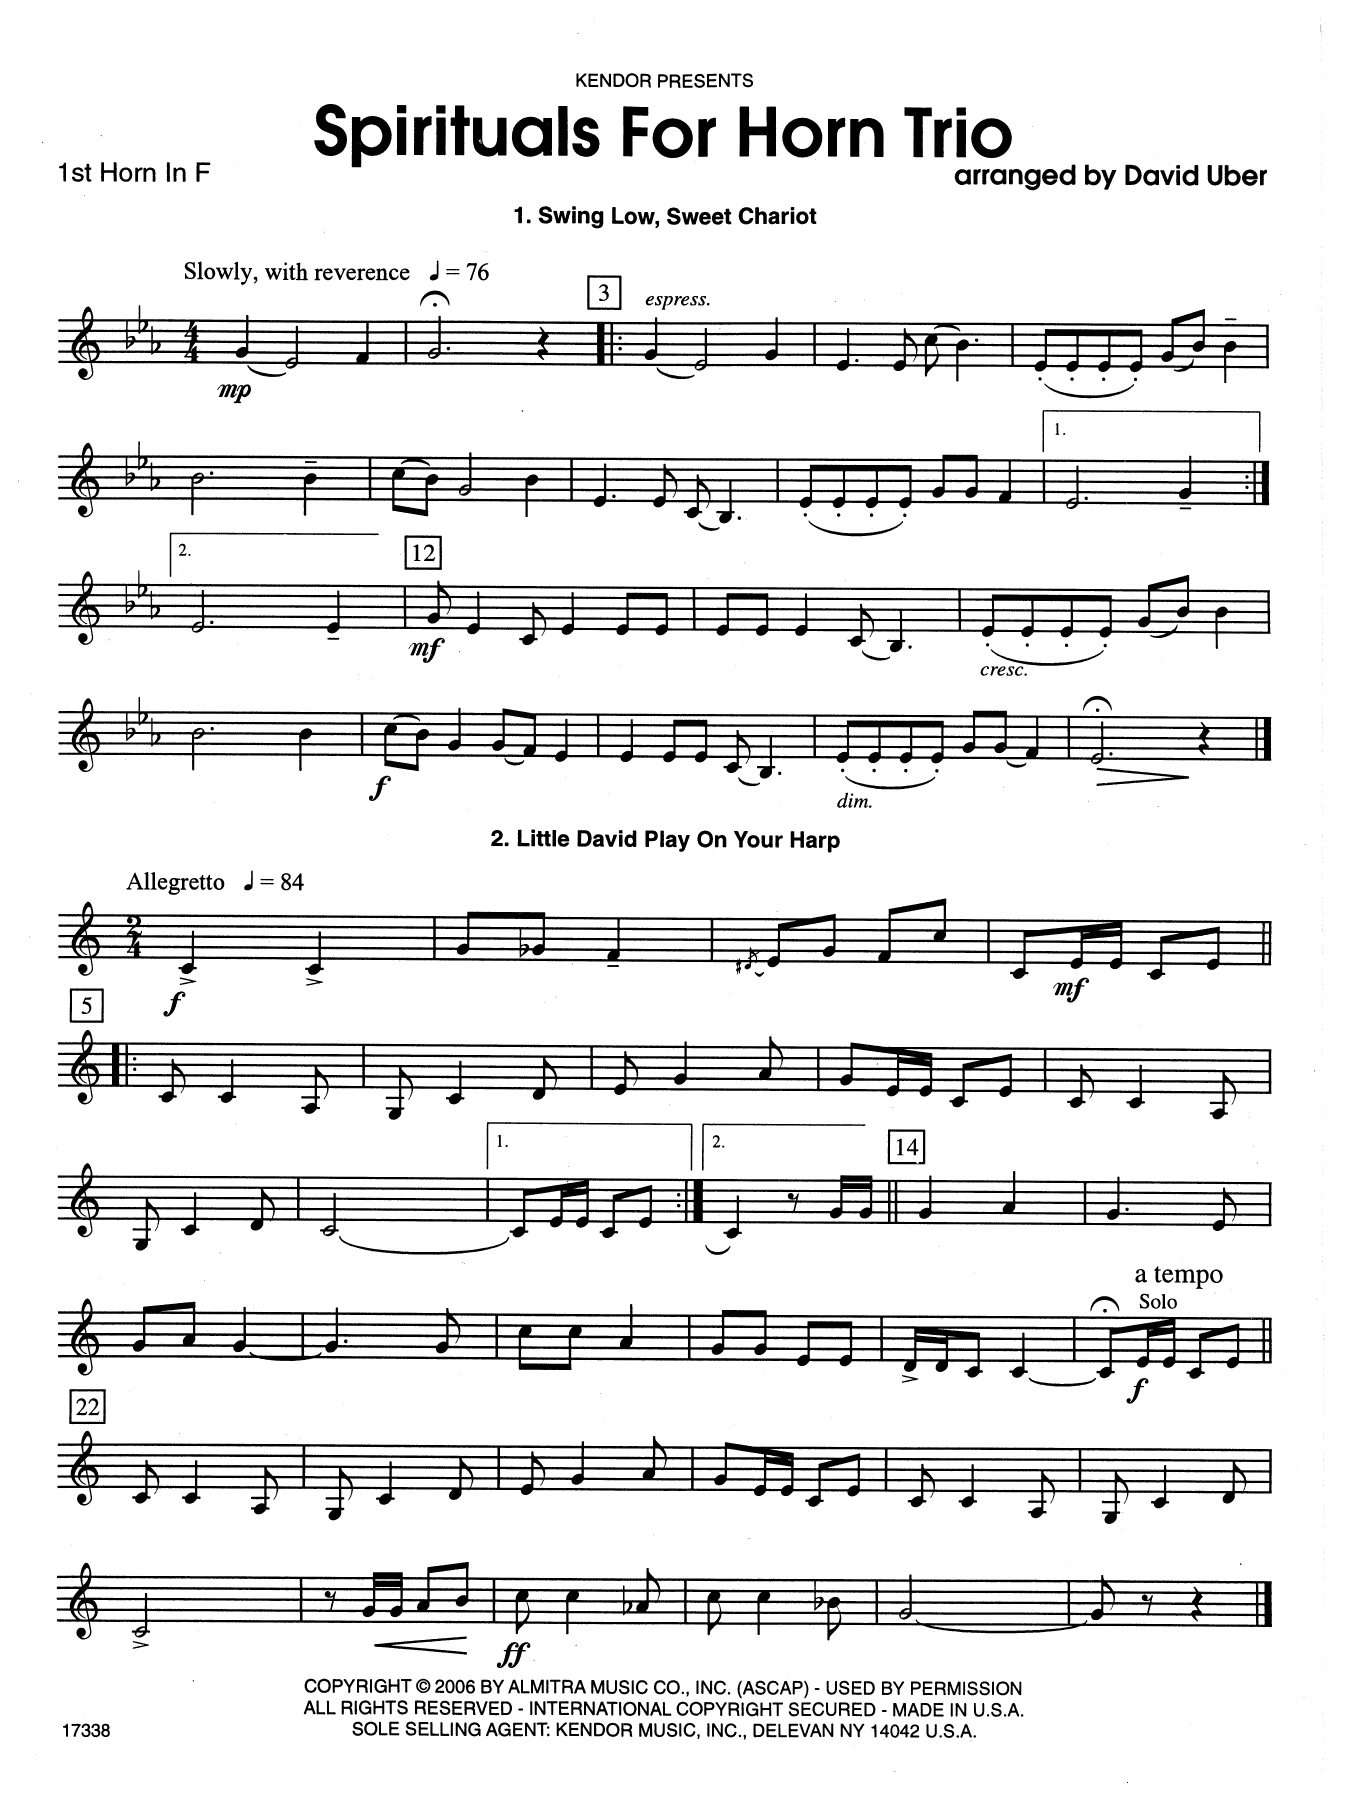 David Uber Spirituals For Horn Trio - 1st Horn in F sheet music notes and chords. Download Printable PDF.